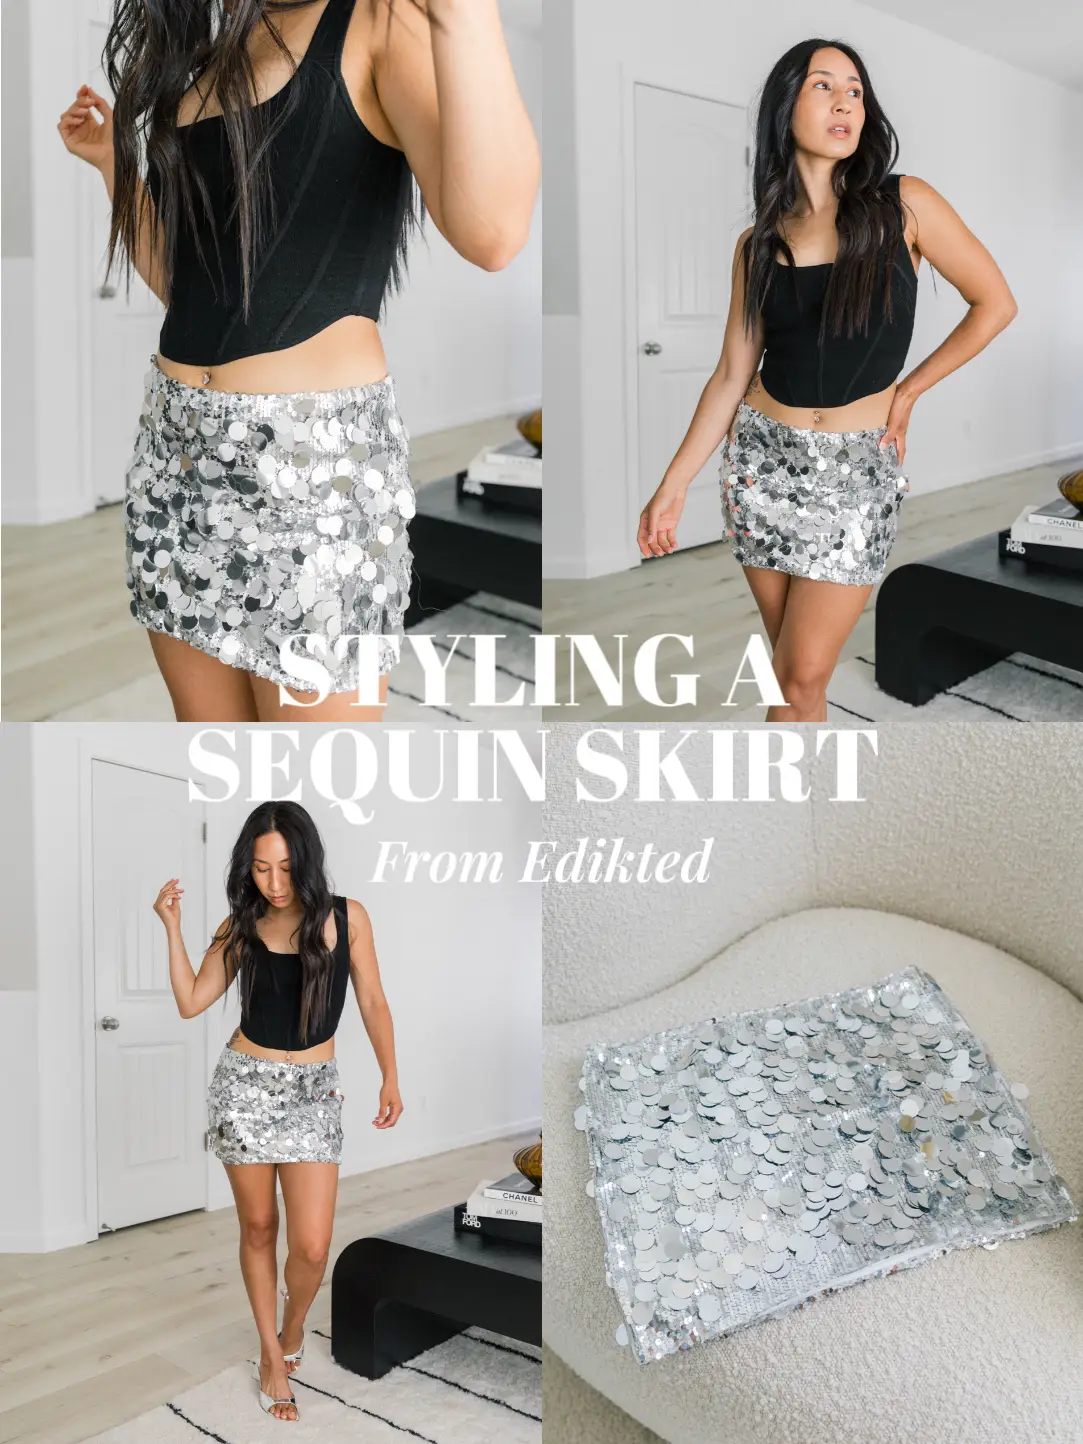 Styling a Vintage Mini Skirt, Gallery posted by Hailey Scott